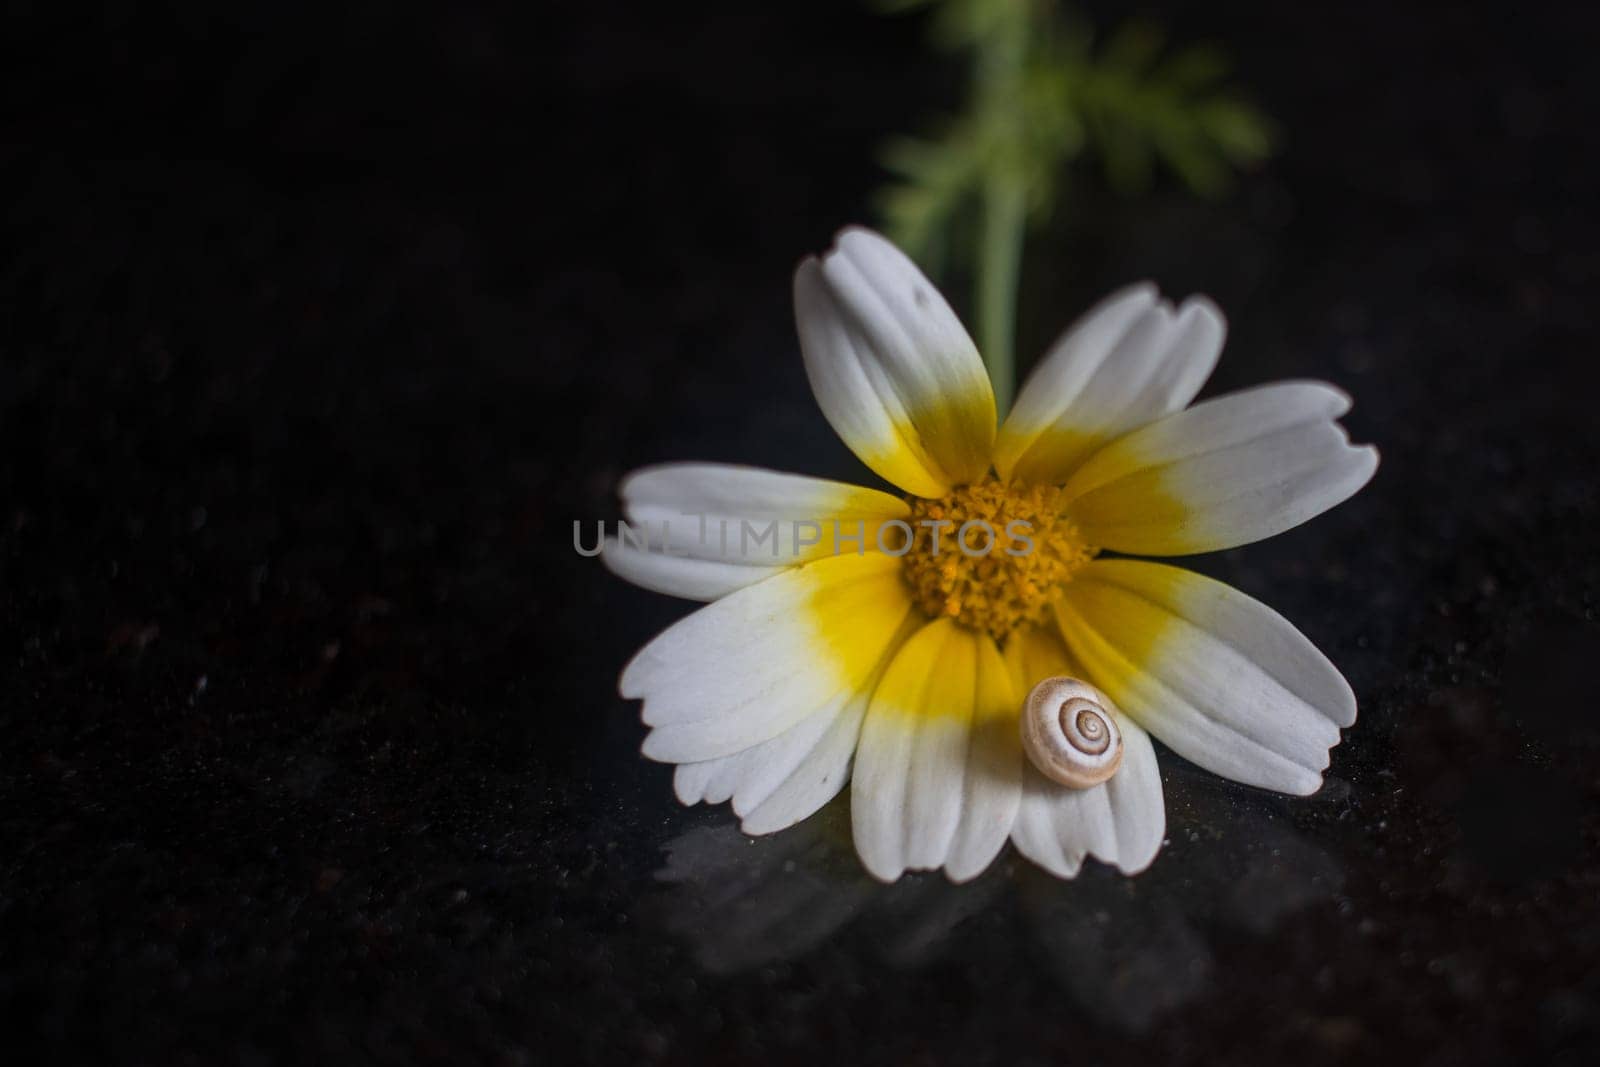 A flower from the daisy family, with white and yellow petals, with a snail perched on it. This herbaceous plant is an annual plant, perfect for macro and still life photography